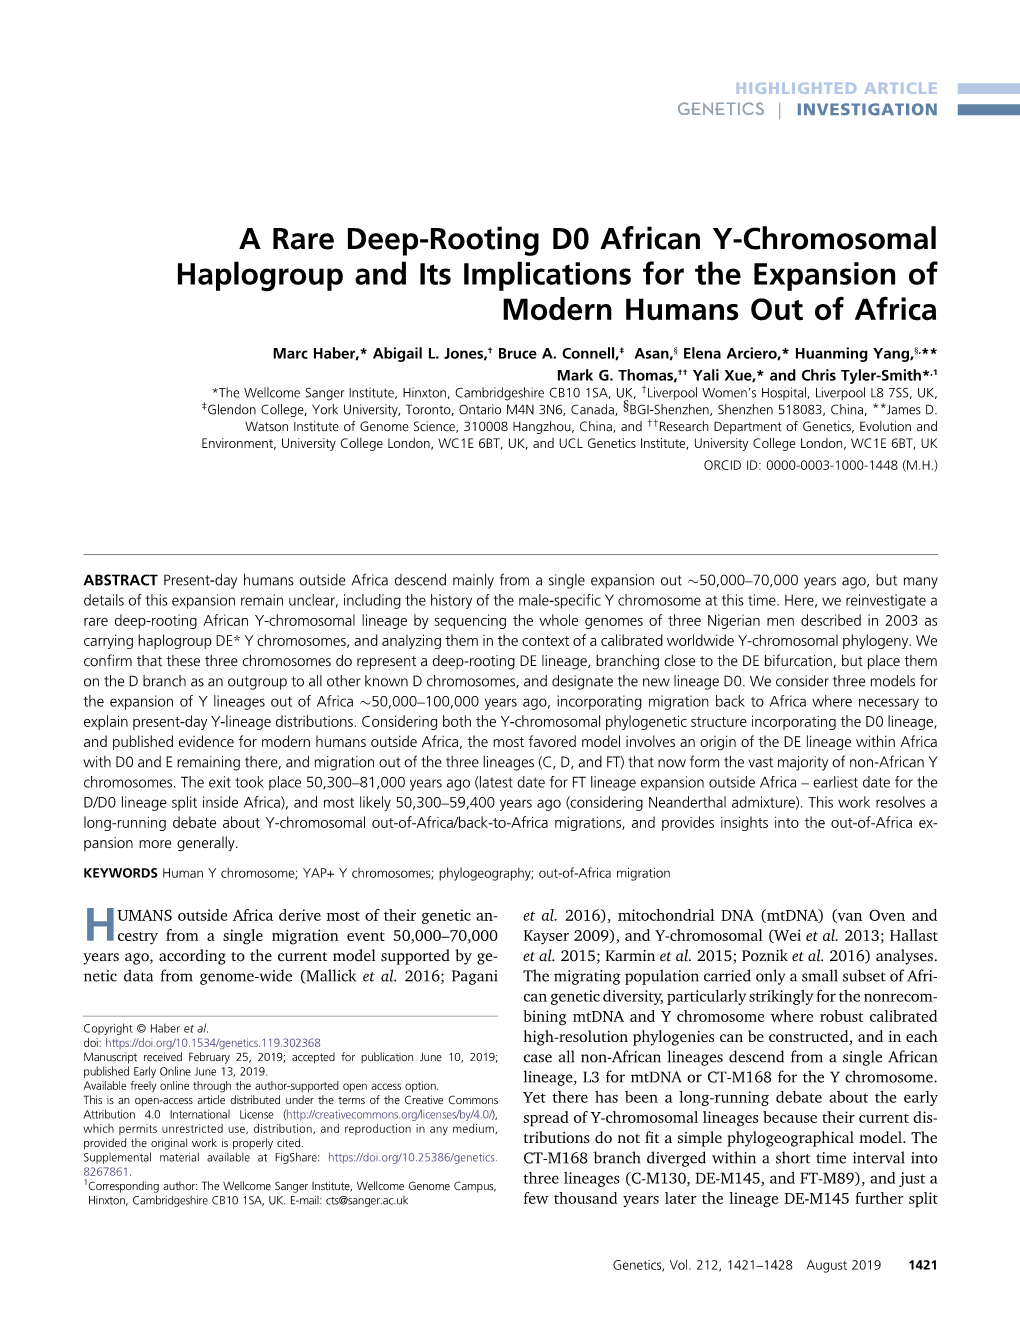 A Rare Deep-Rooting D0 African Y-Chromosomal Haplogroup and Its Implications for the Expansion of Modern Humans out of Africa